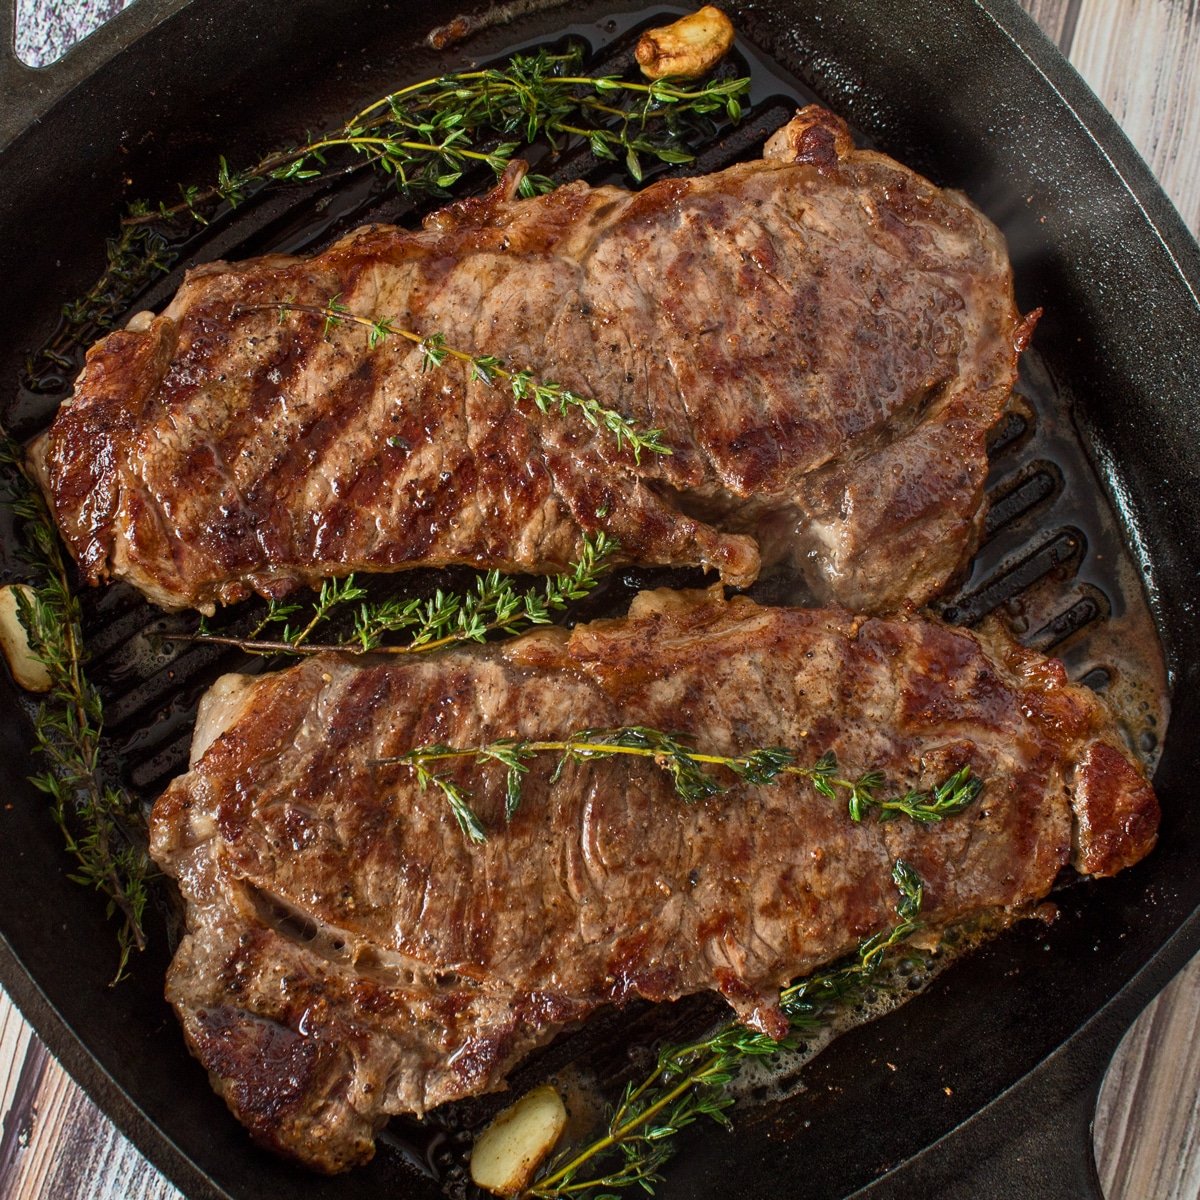 The perfect restaurant quality steak is easy to make at home with this pan seared New York Strip steak method!